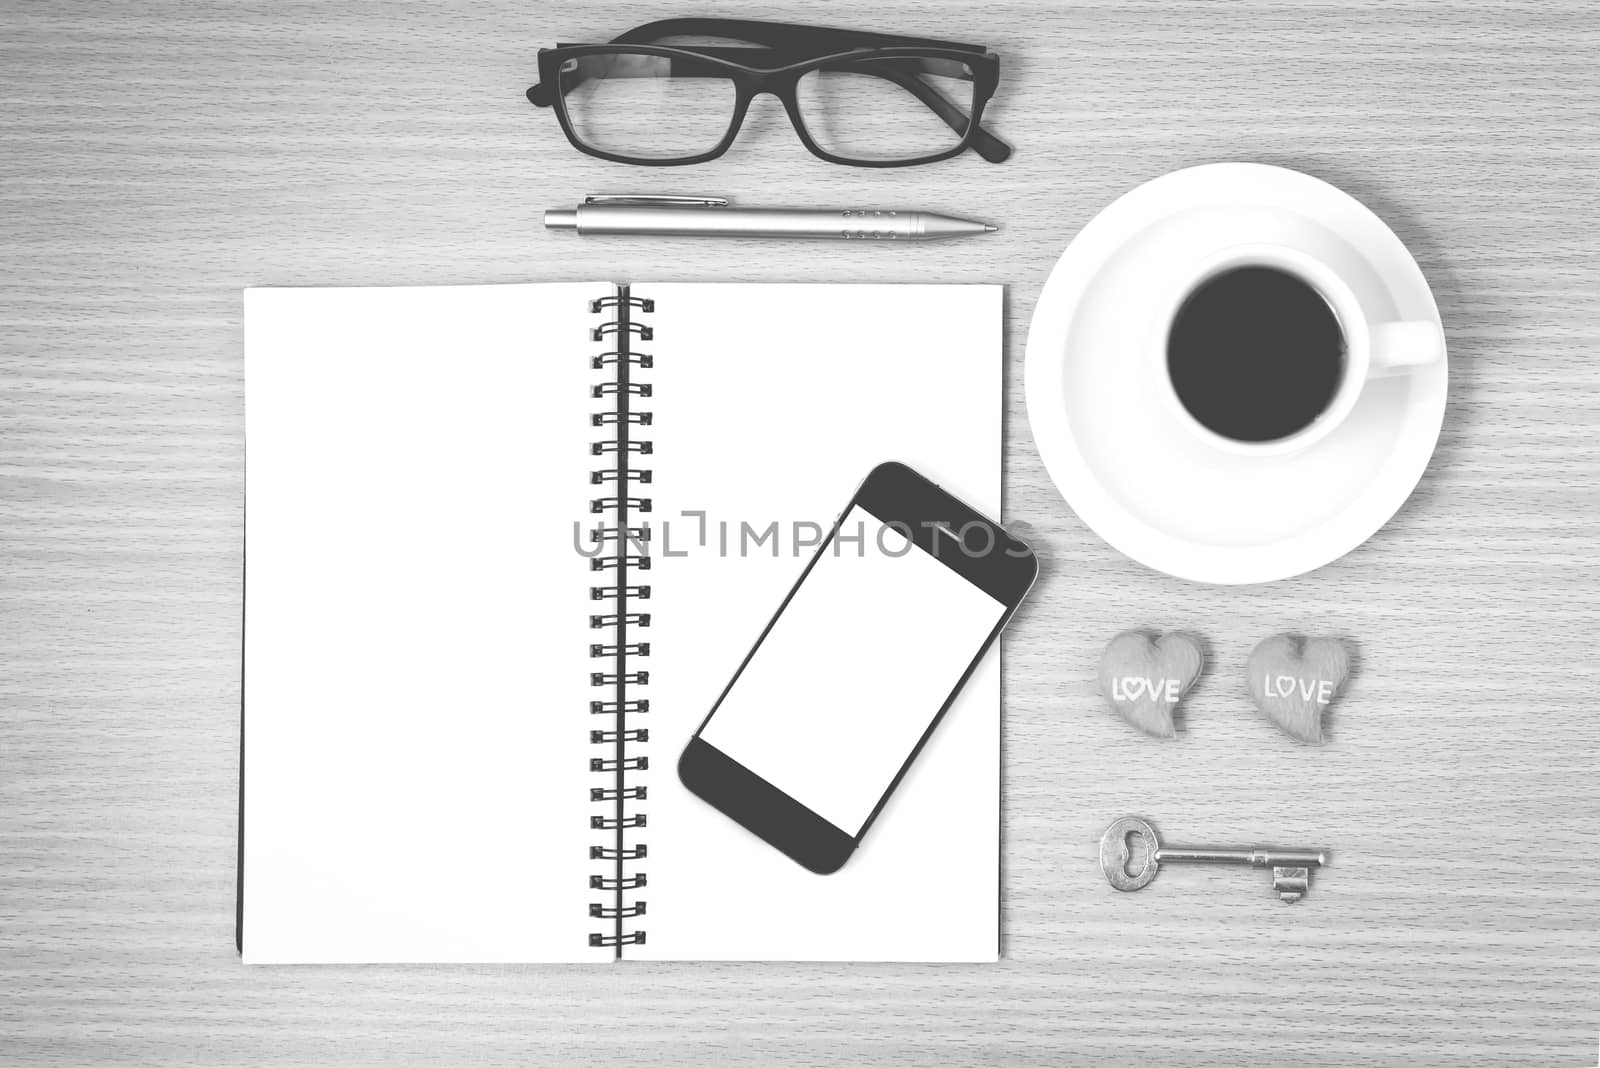 office desk : coffee and phone with key,eyeglasses,notepad,heart on wood background black and white color